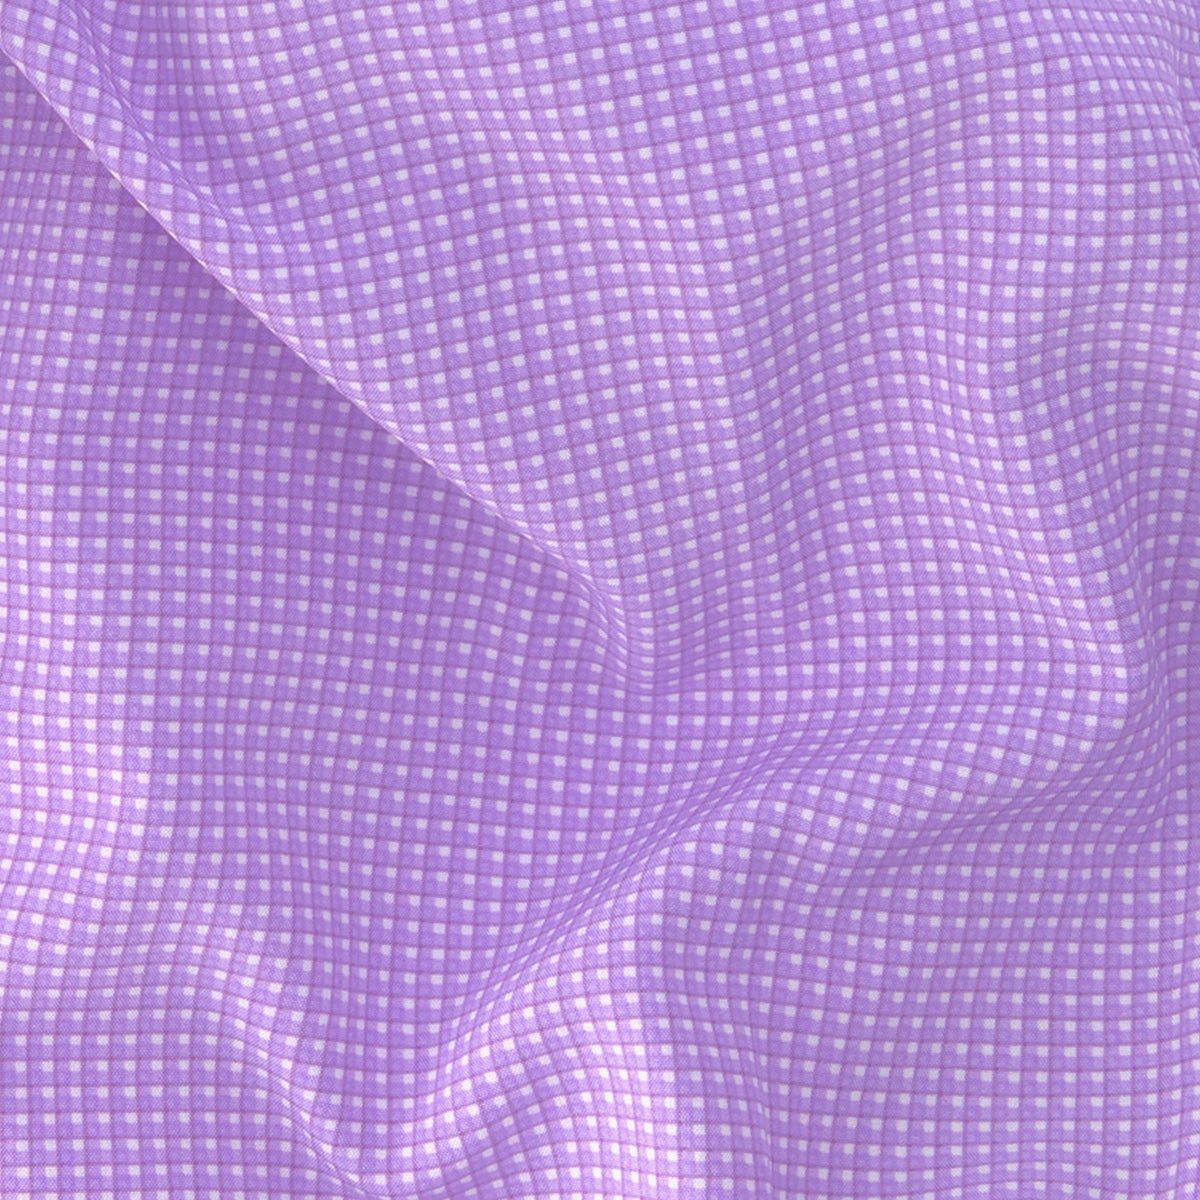 Material of Long Sleeve 4-Way Dress Shirt with Check Print in Lavender